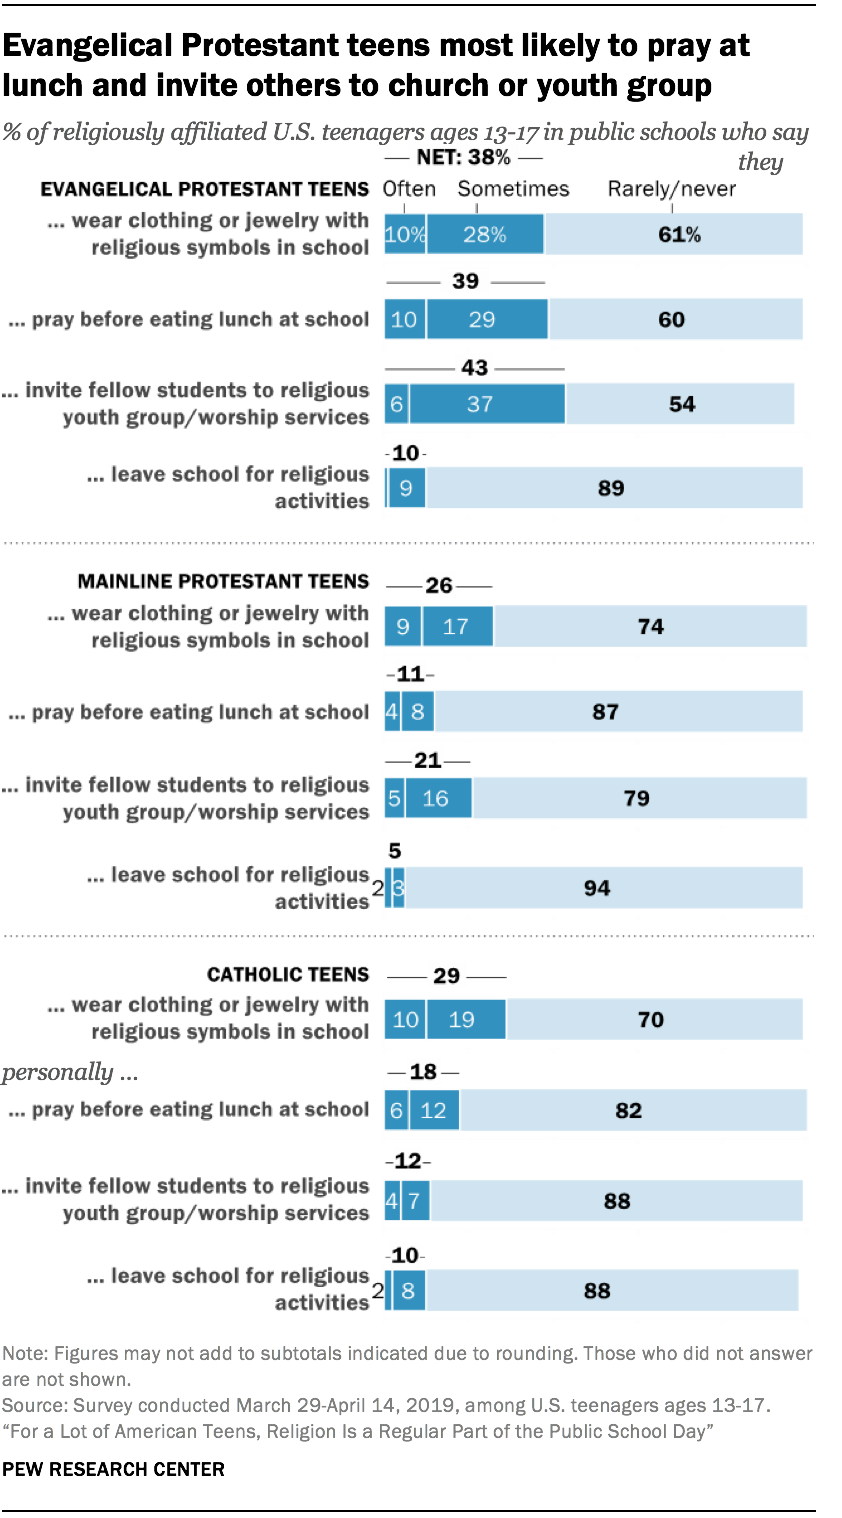 Evangelical Protestant teens most likely to pray at lunch and invite others to church or youth group